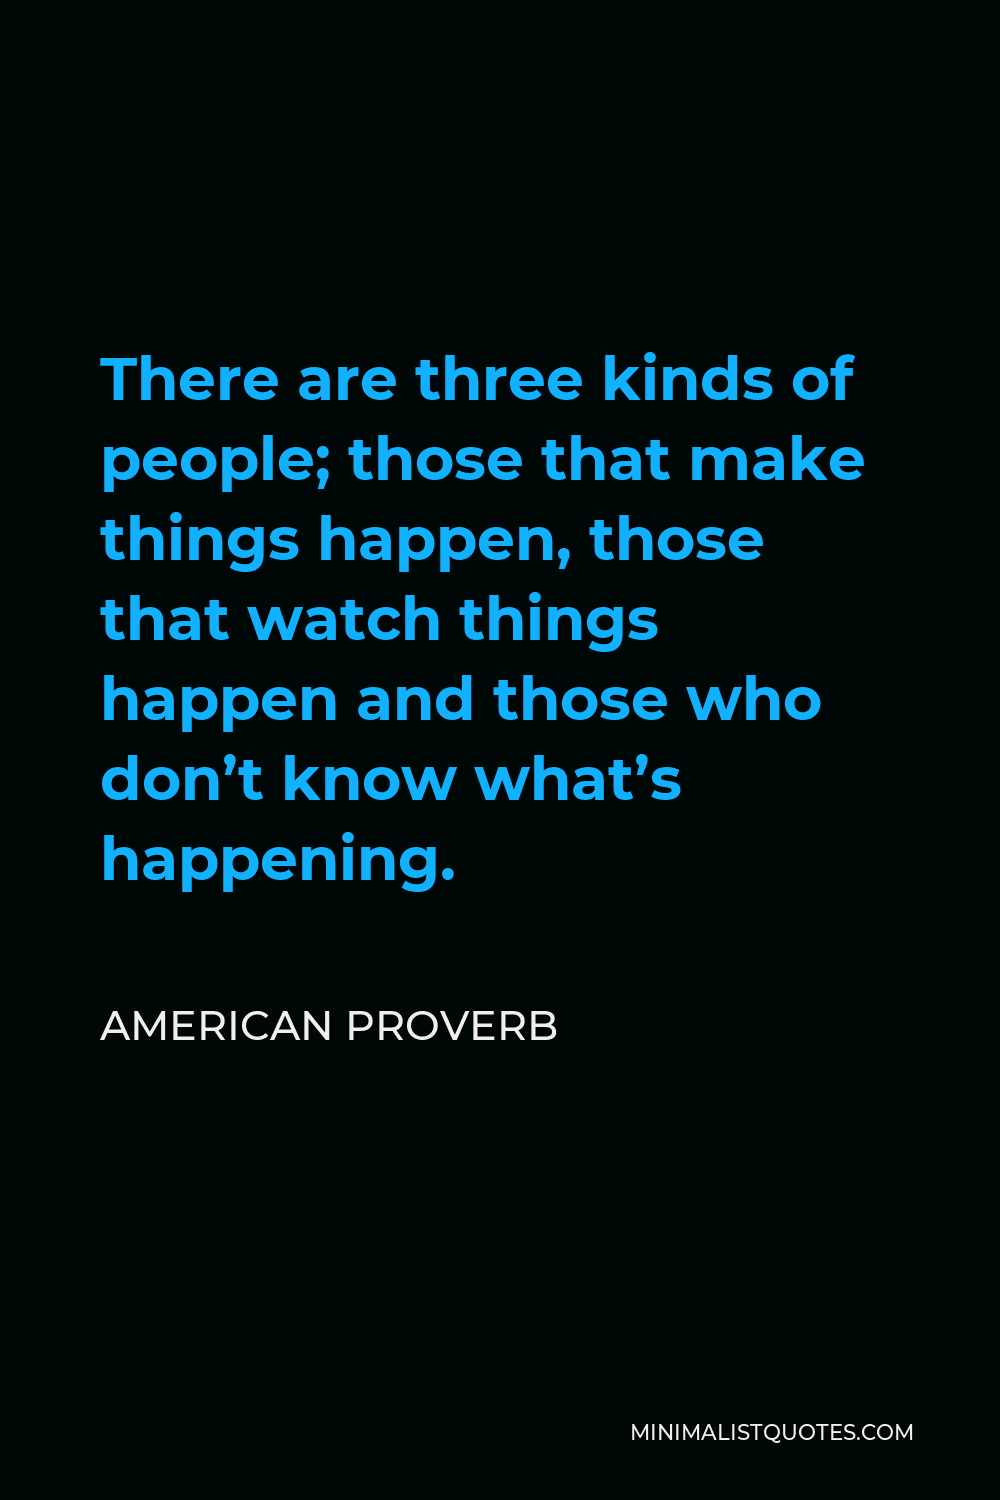 American Proverb Quote - There are three kinds of people; those that make things happen, those that watch things happen and those who don’t know what’s happening.